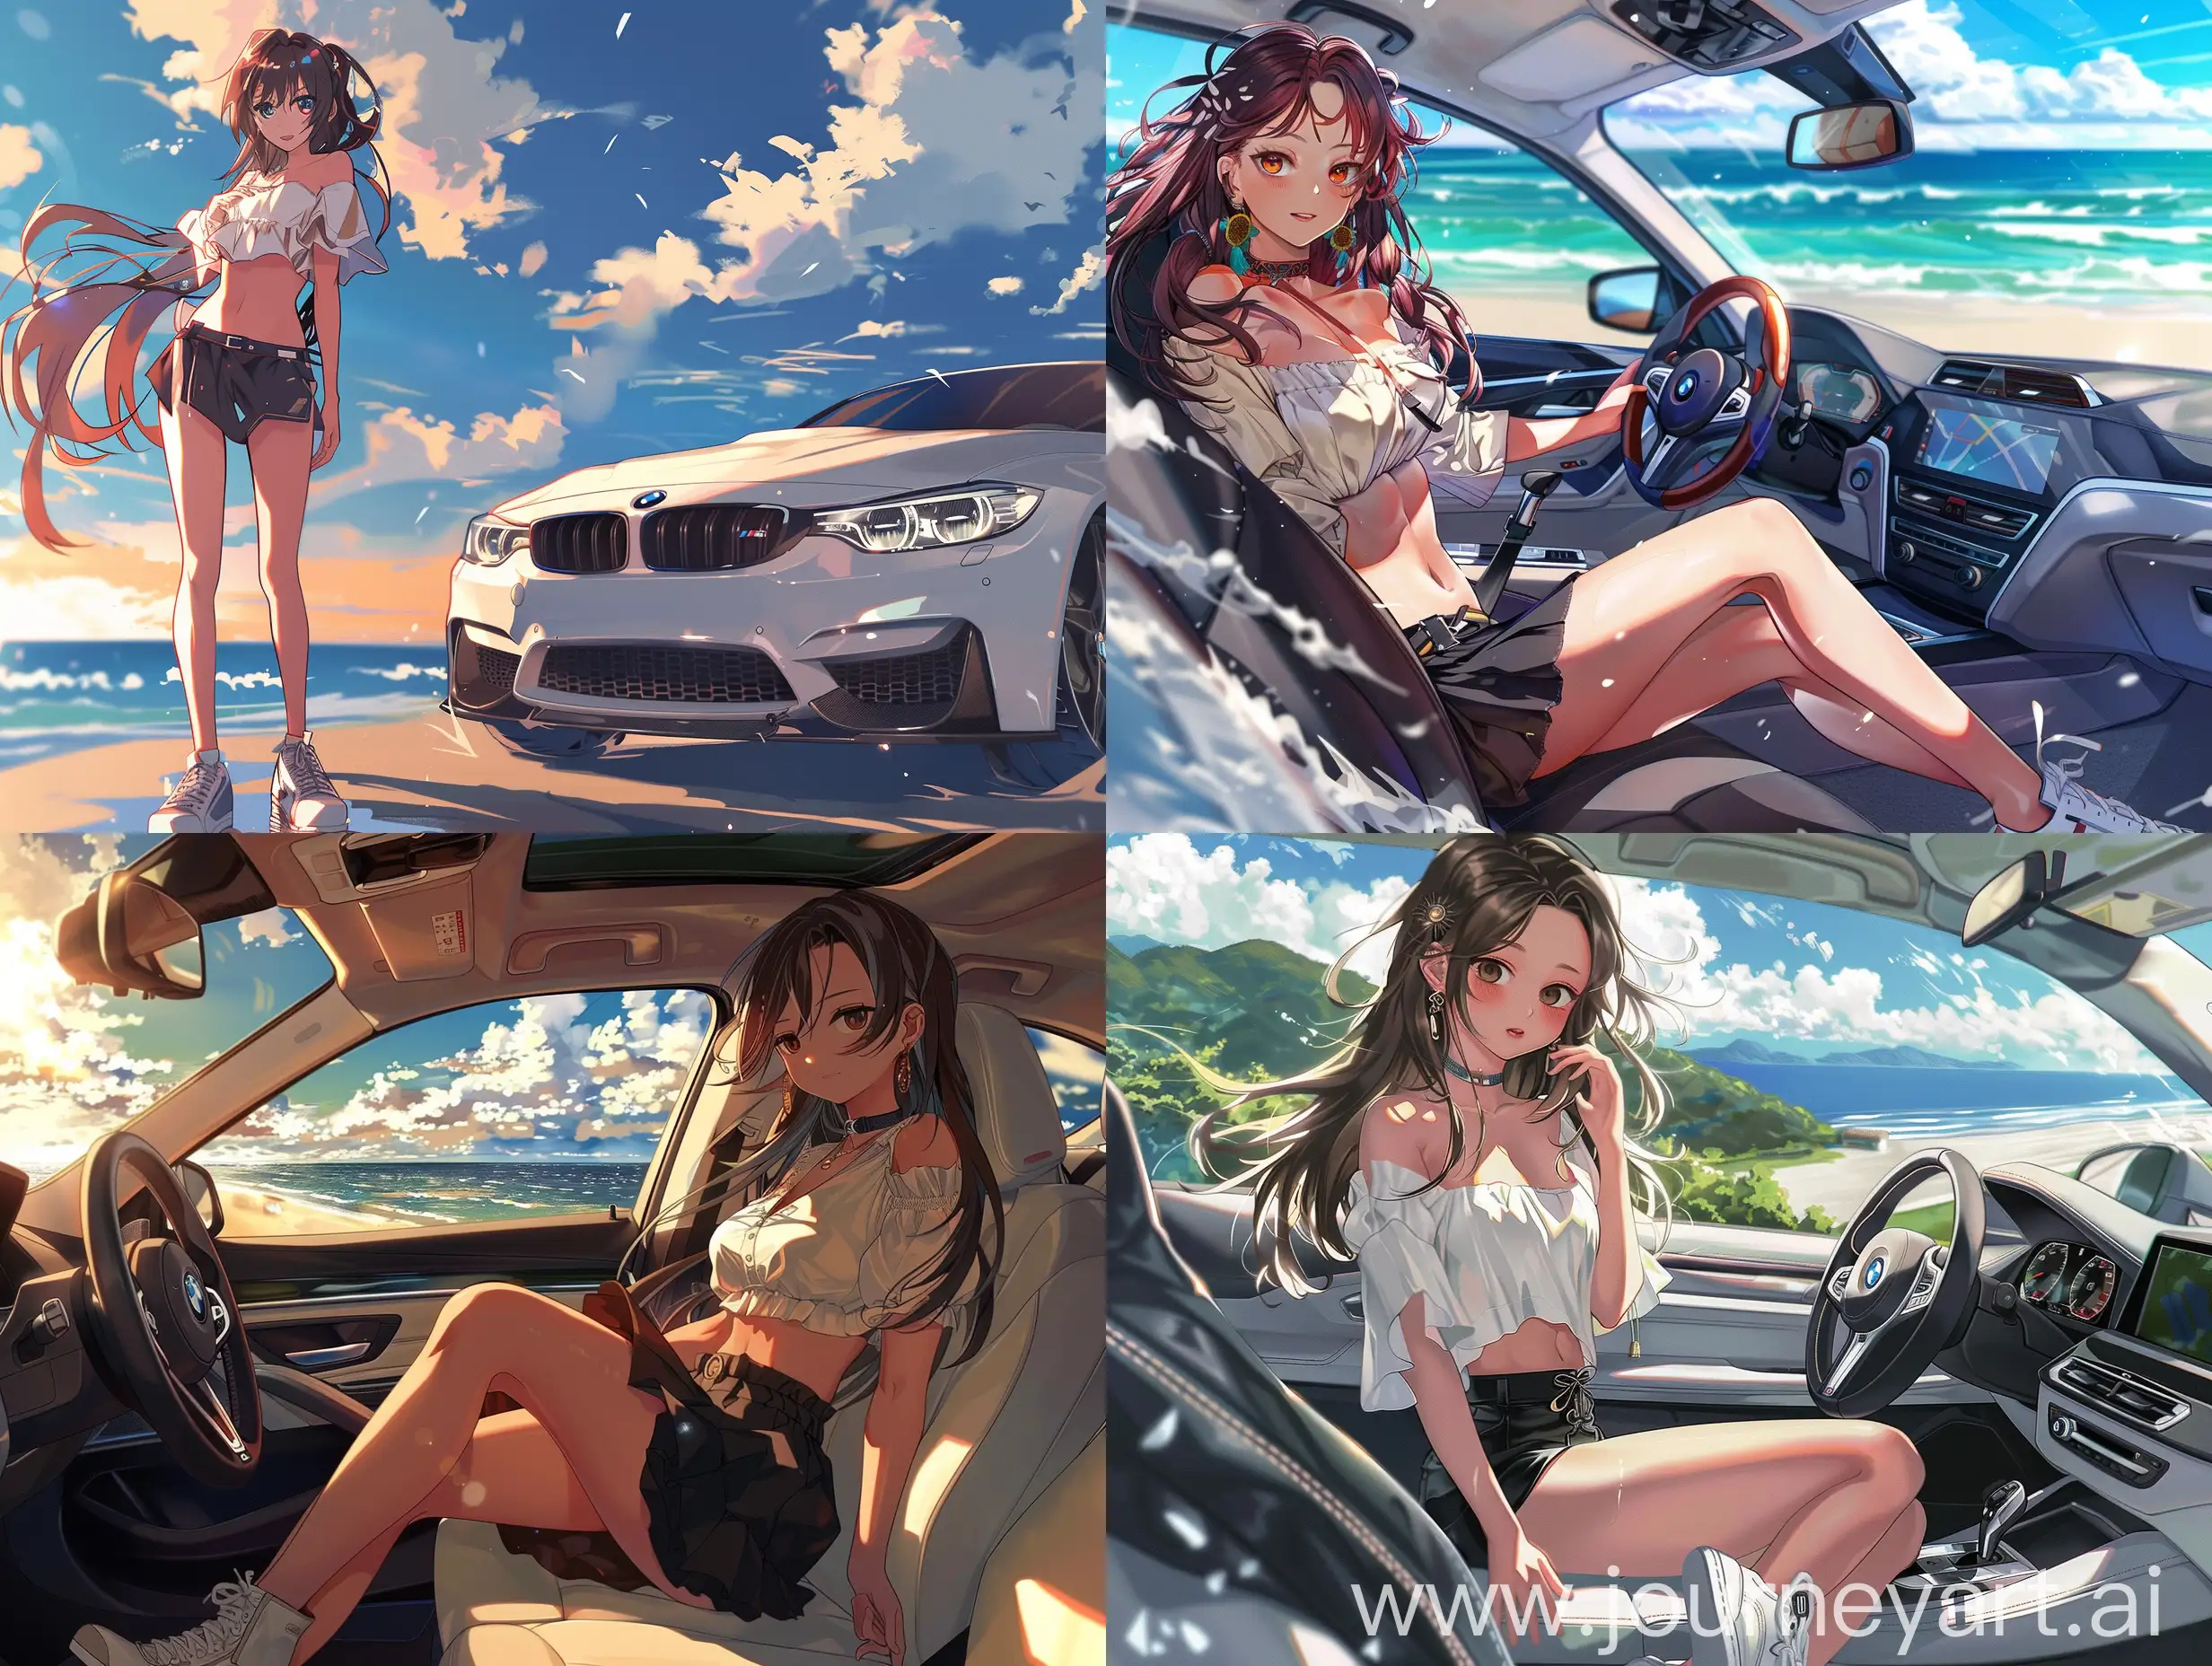 Anime-Girl-in-White-Shirt-and-Black-Skirt-Driving-BMW-to-the-Sea